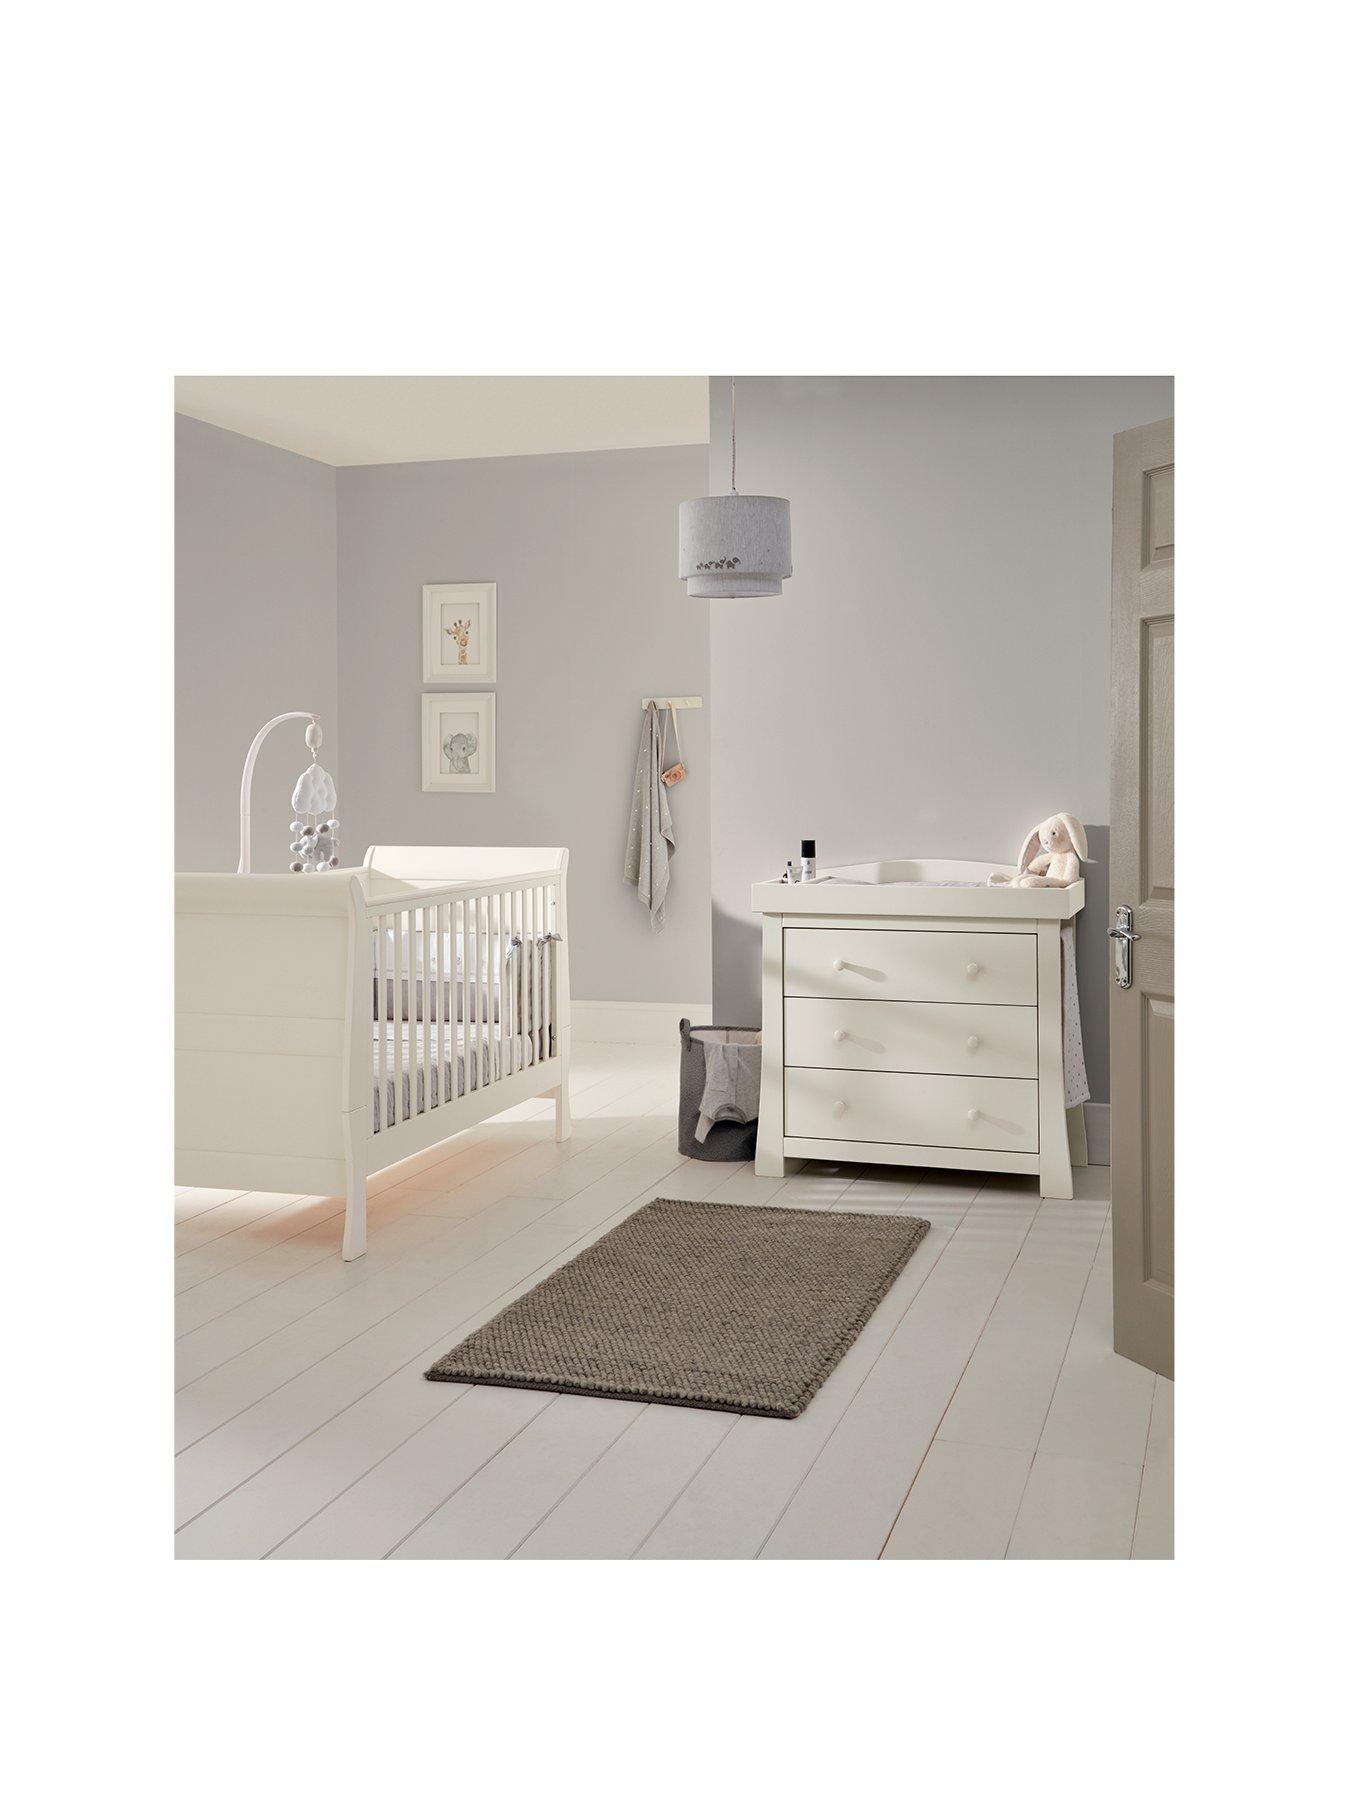 padstow cot bed